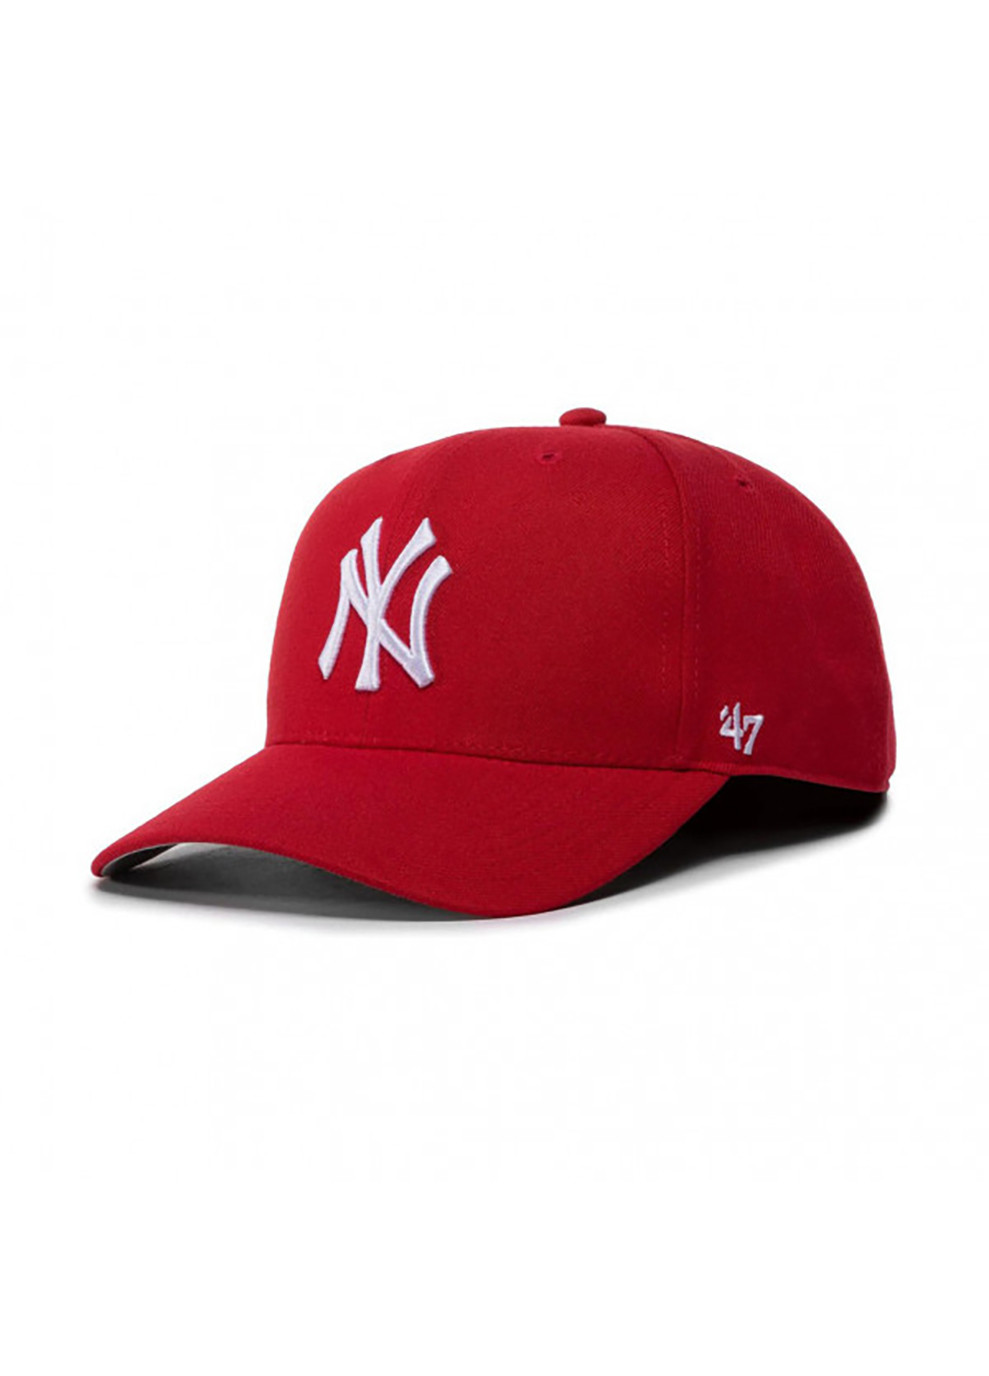 Кепка MVP DP NY YANKEES One Size Grey/Red 47 Brand (258131705)